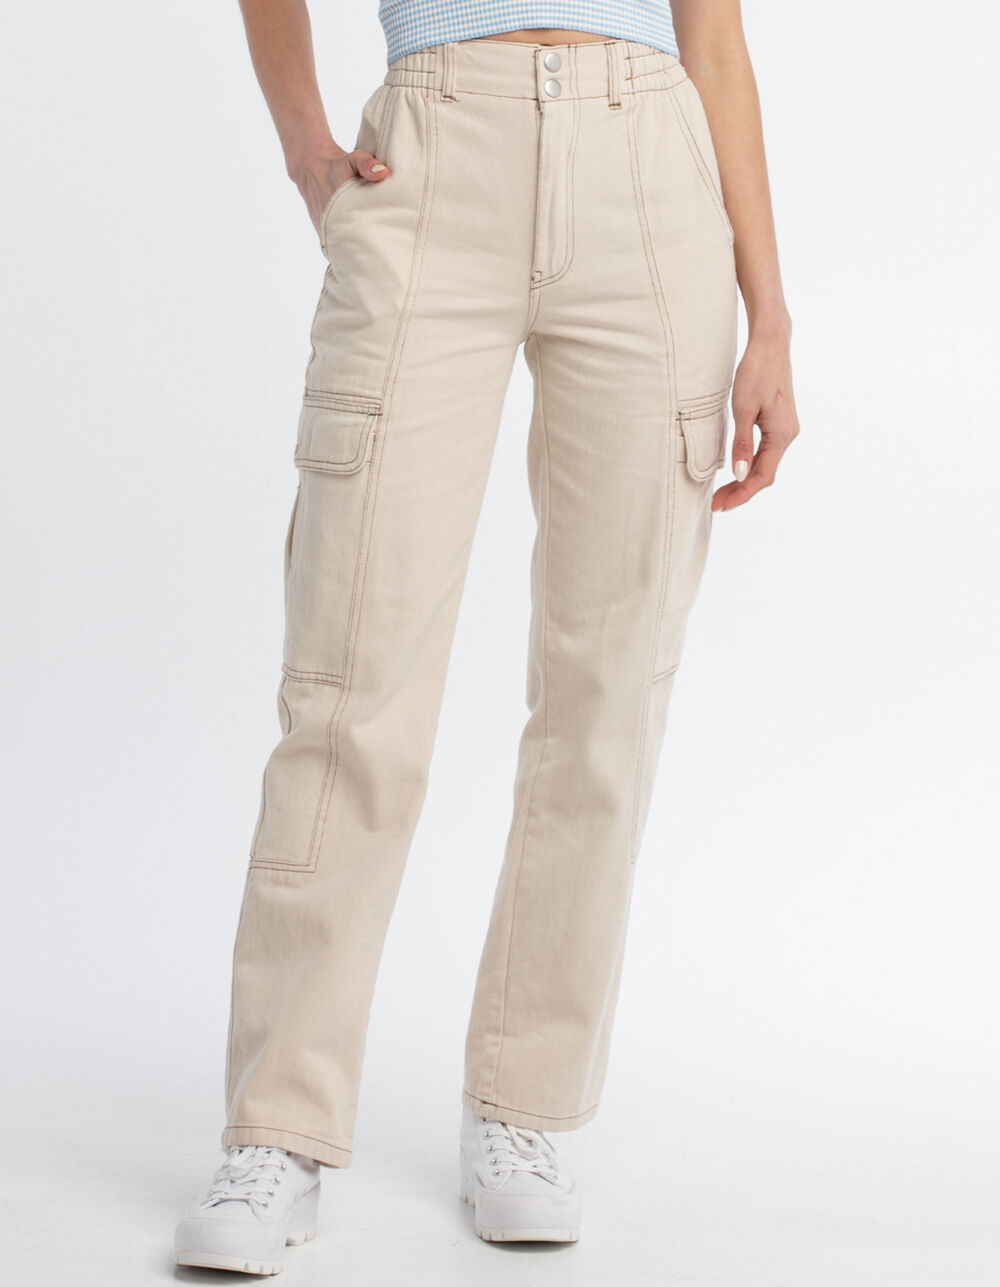 Women's Cargo Pants for sale in Guilford Hills